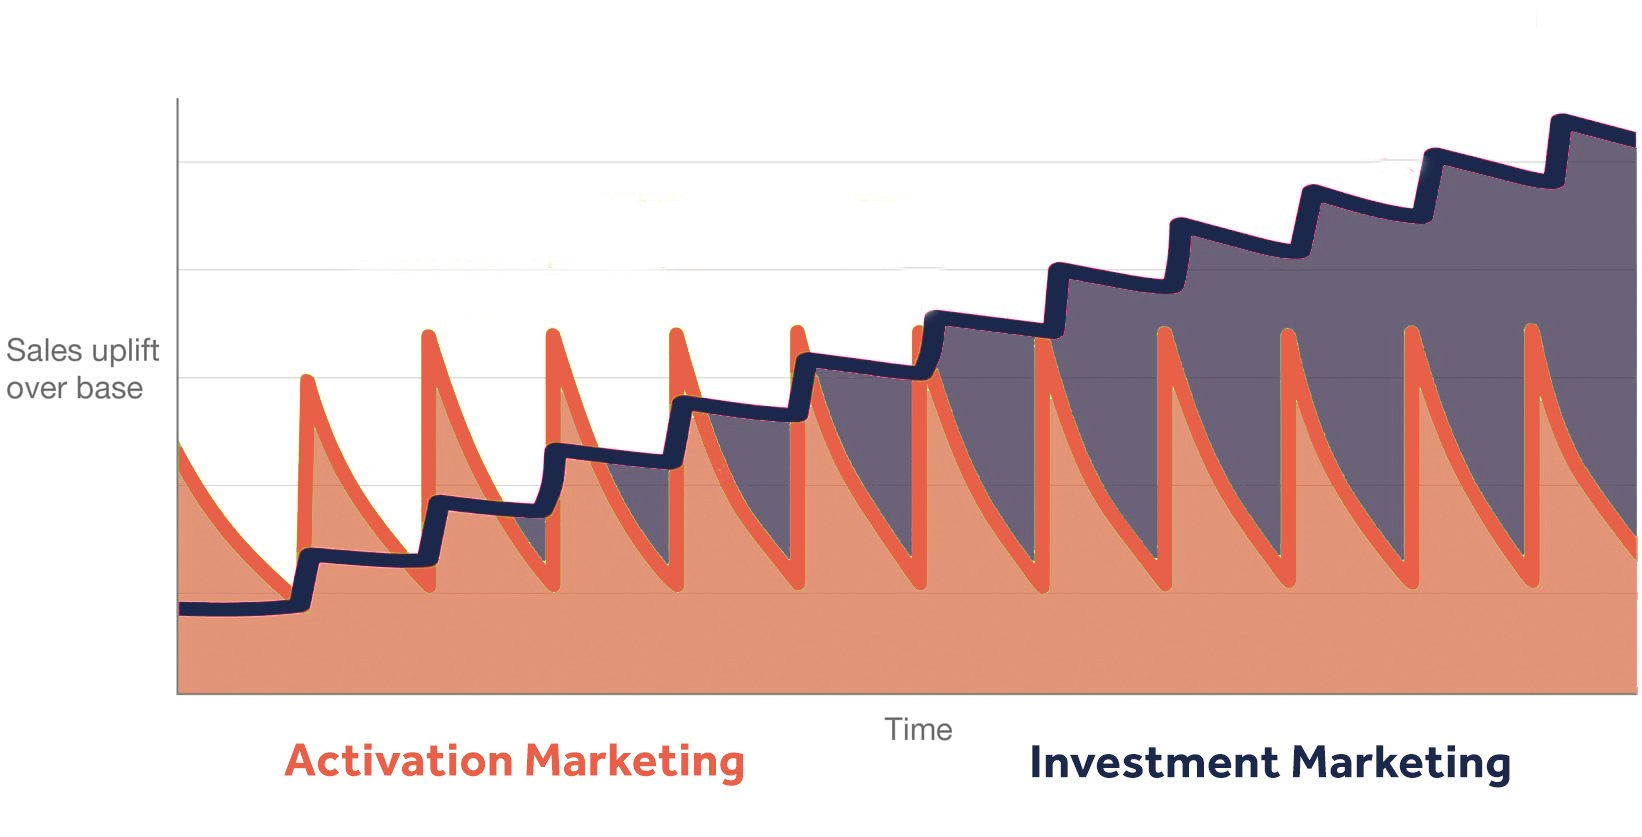 investment marketing overtakes activation marketing in terms of sales in the long run